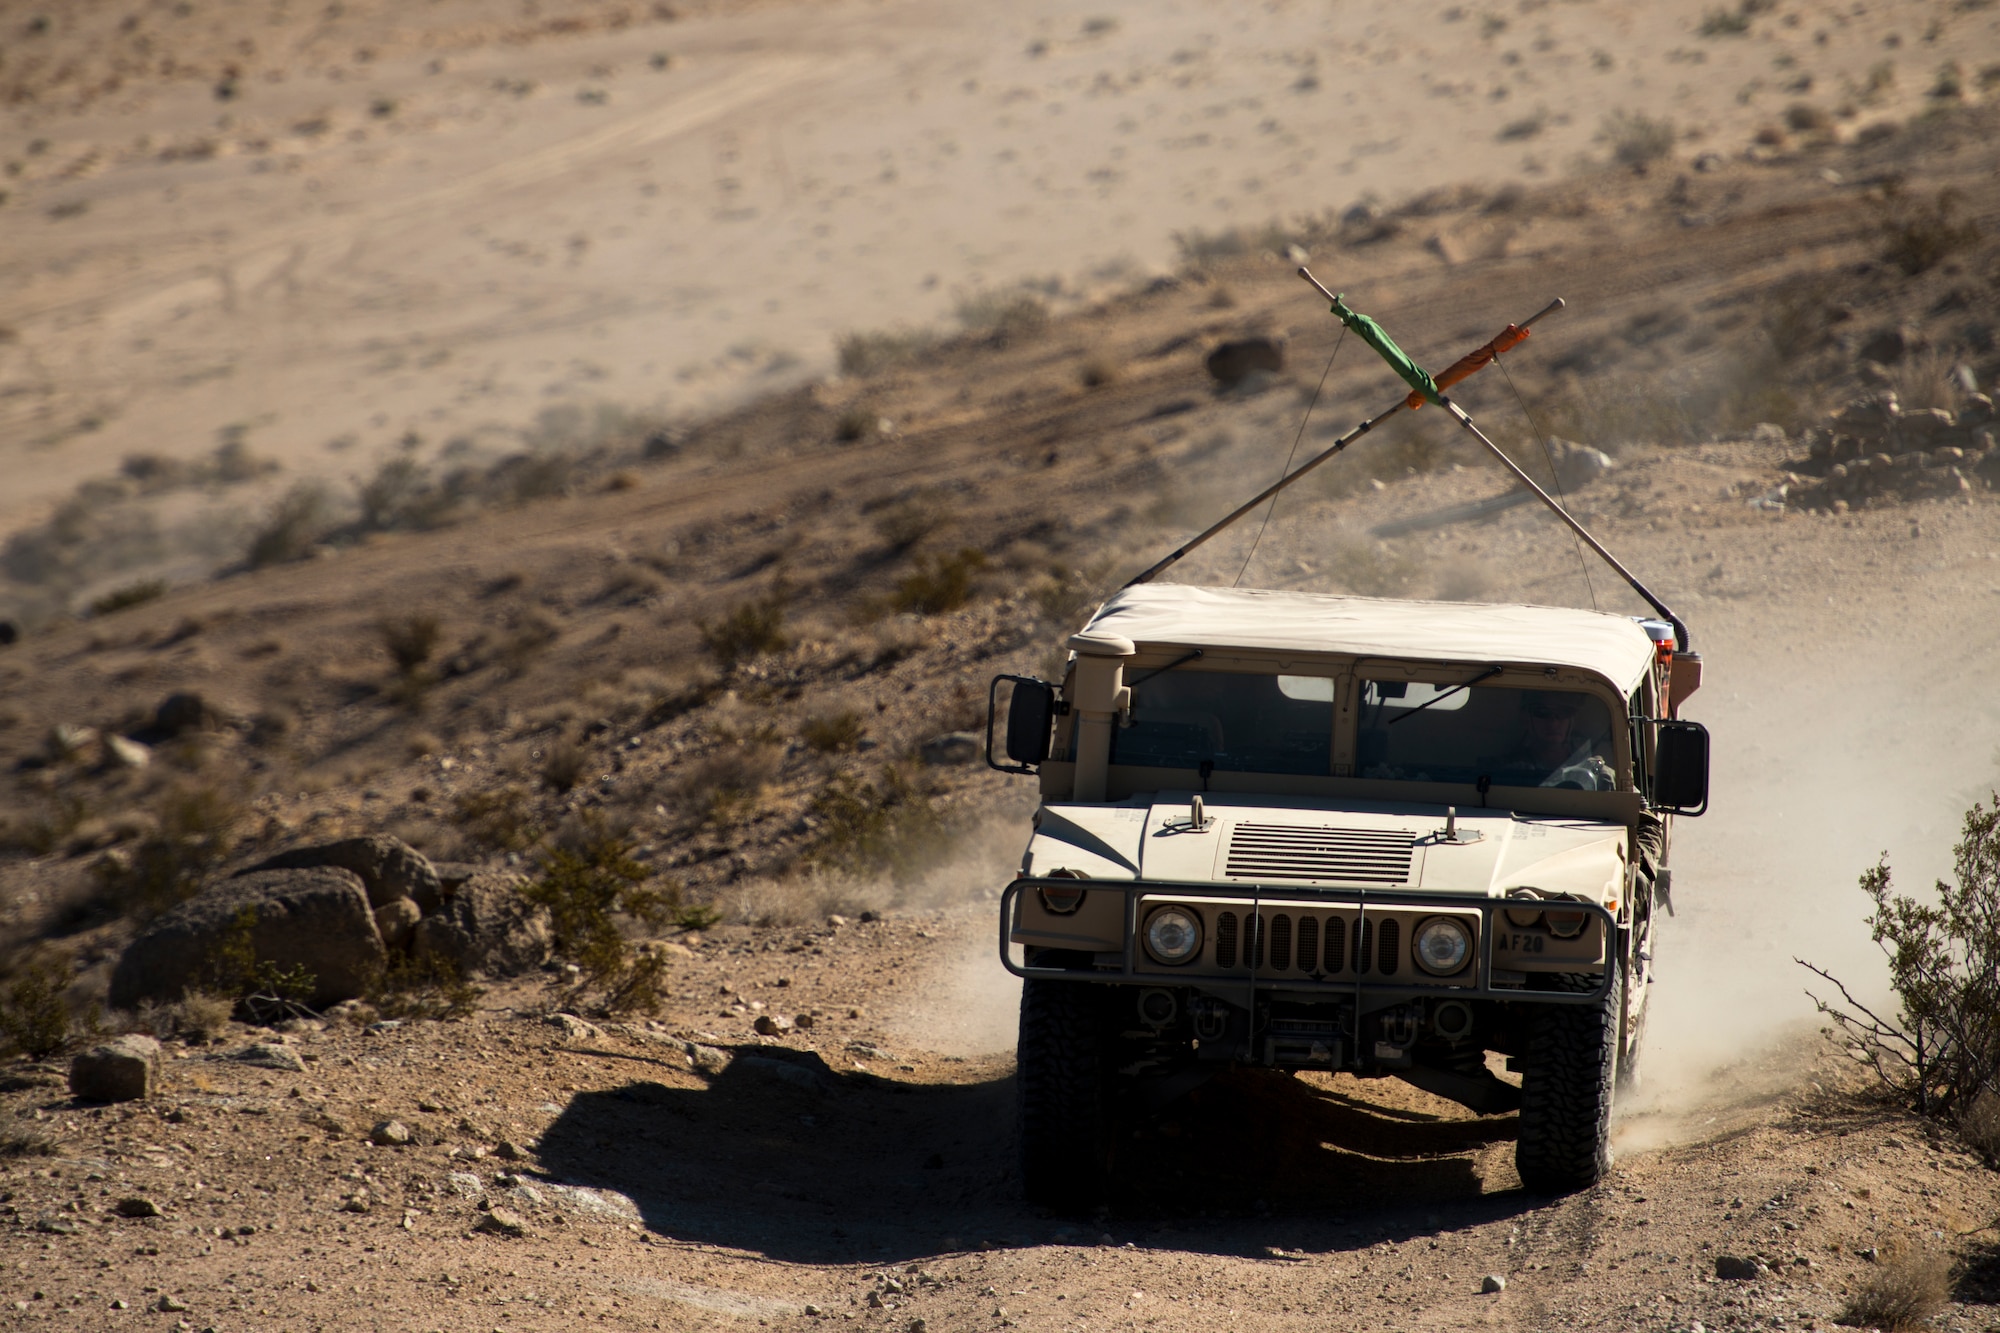 Staff Sgt. Dustin Selljes, 12th Combat Training Squadron joint terminal attack controller, drives a Humvee up a mountain during Green Flag West, June 12, 2018, at the National Training Center, Ft. Irwin, California. The NTC replicates the tough, realistic operational environment that America’s war fighters face in combat. (U.S. Air Force photo by Airman 1st Class JaNae Capuno)